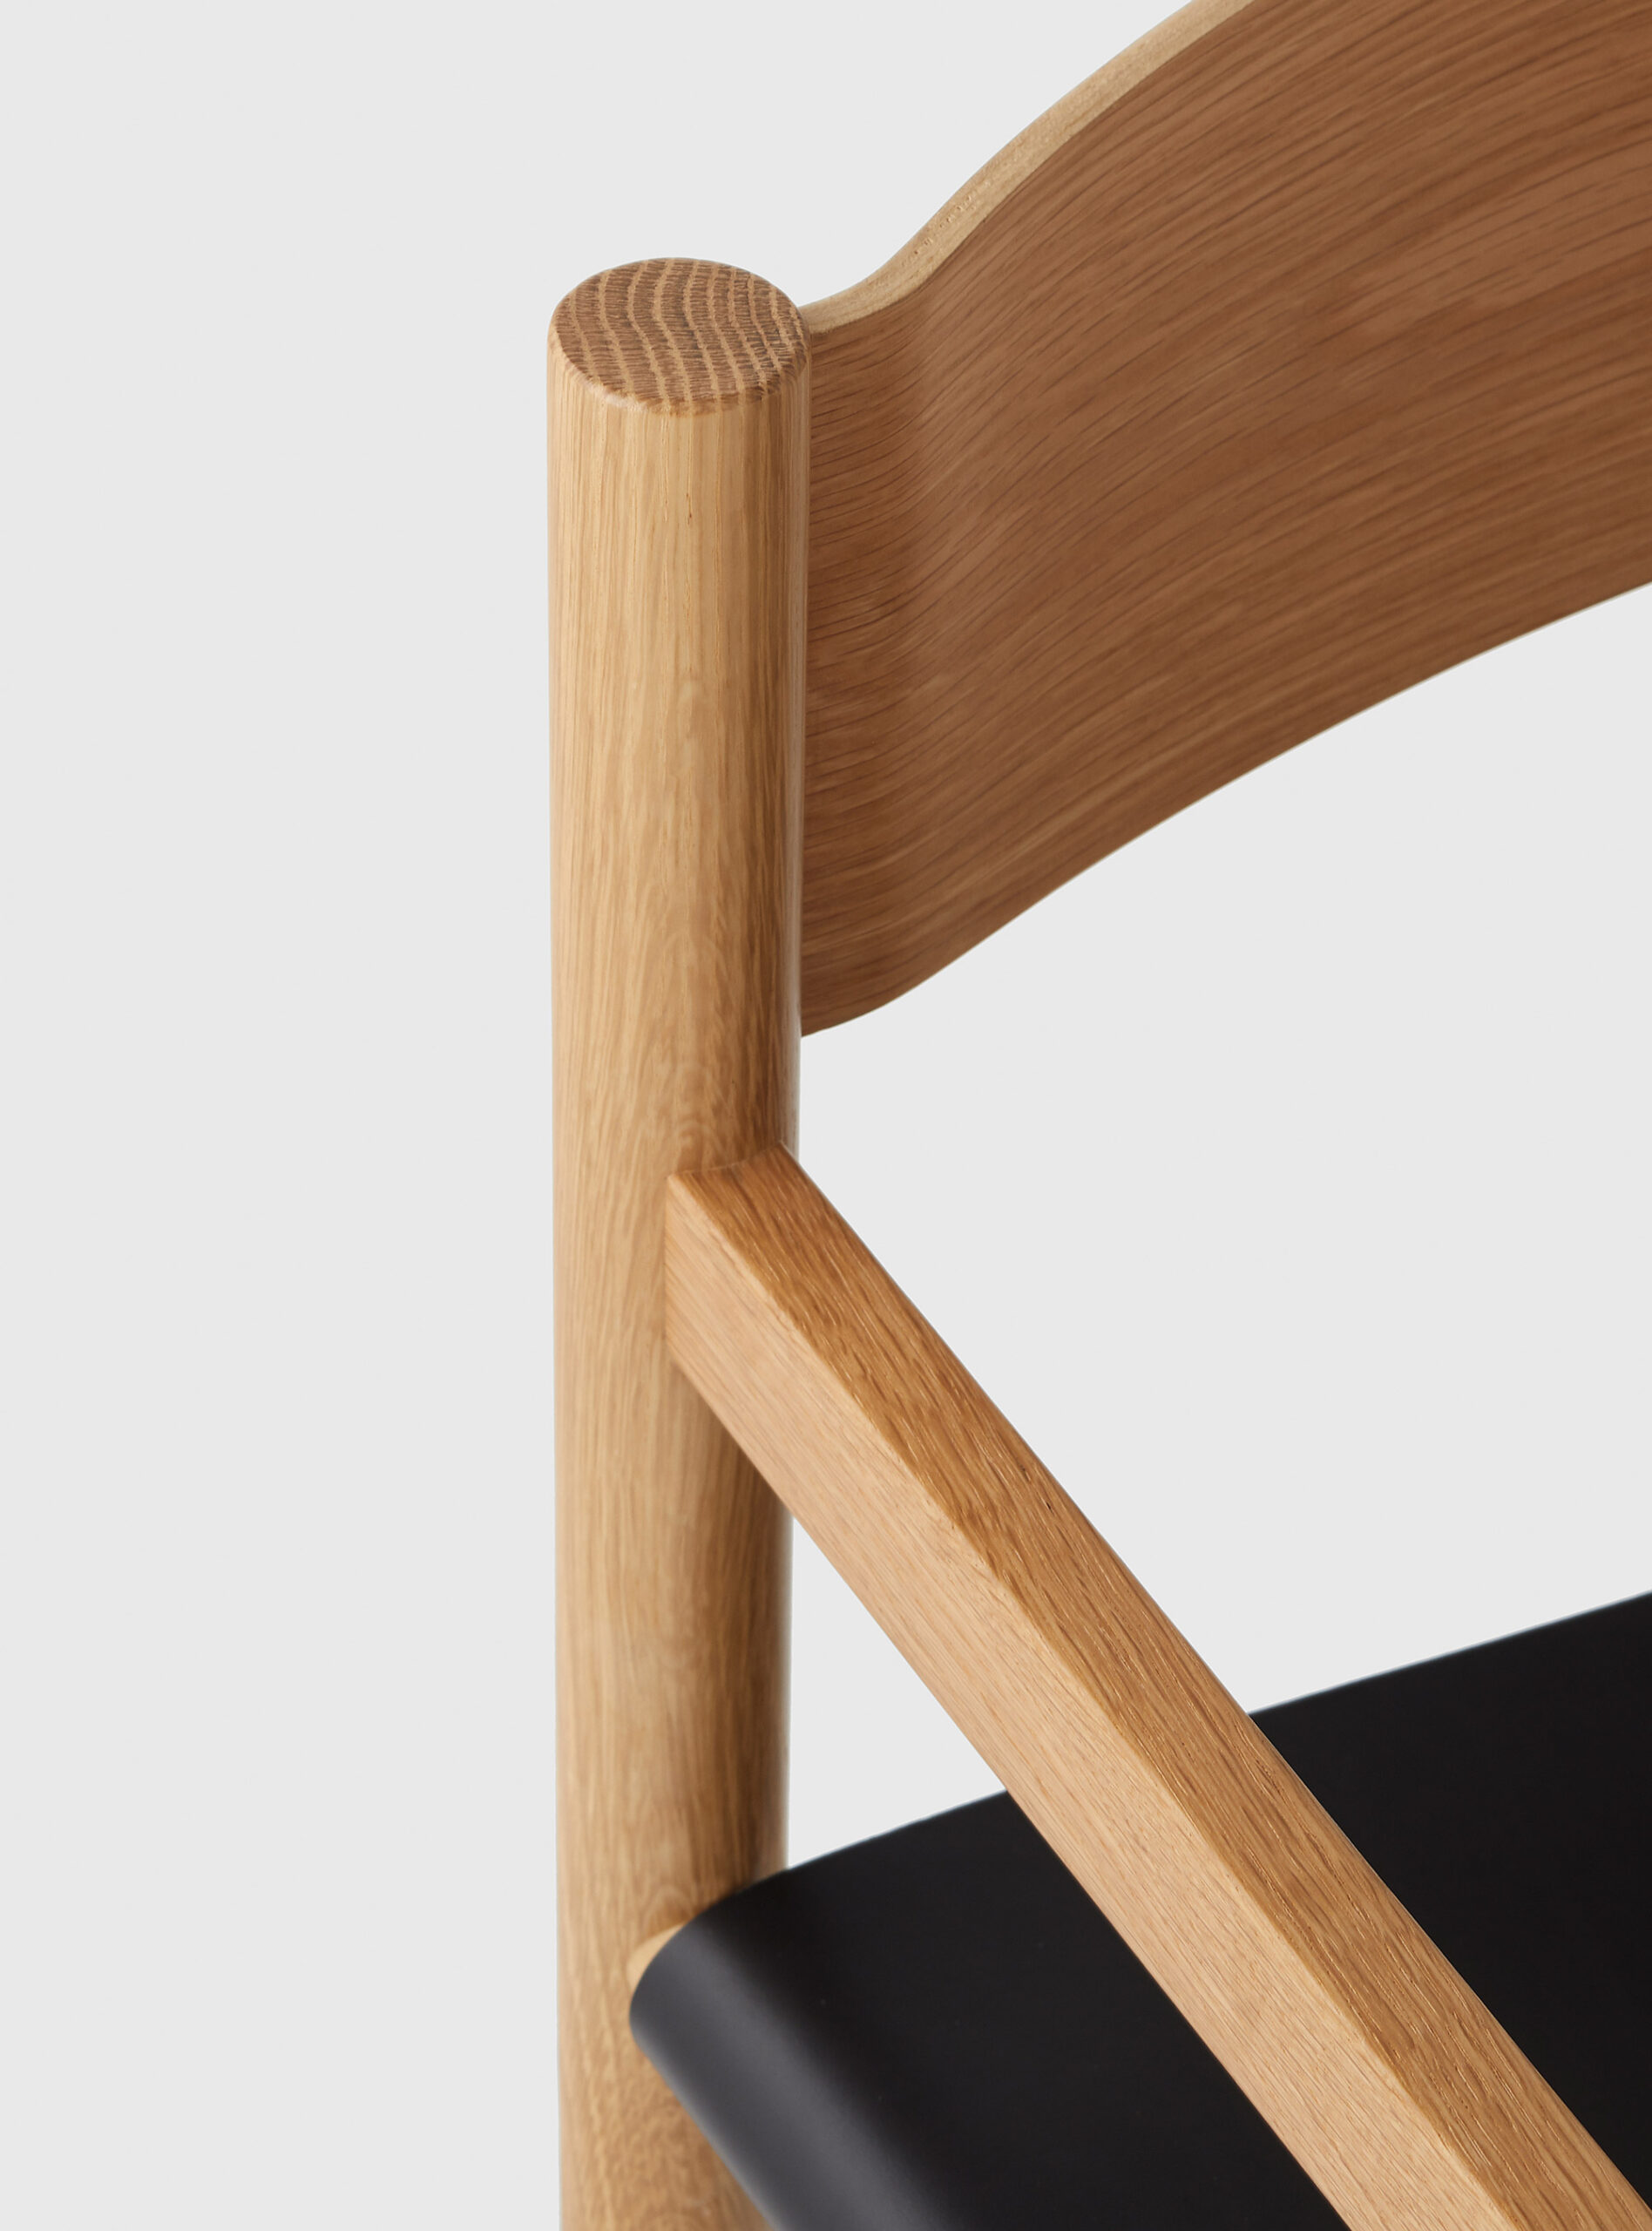 Detail of the Passenger Chair designed by Simon James